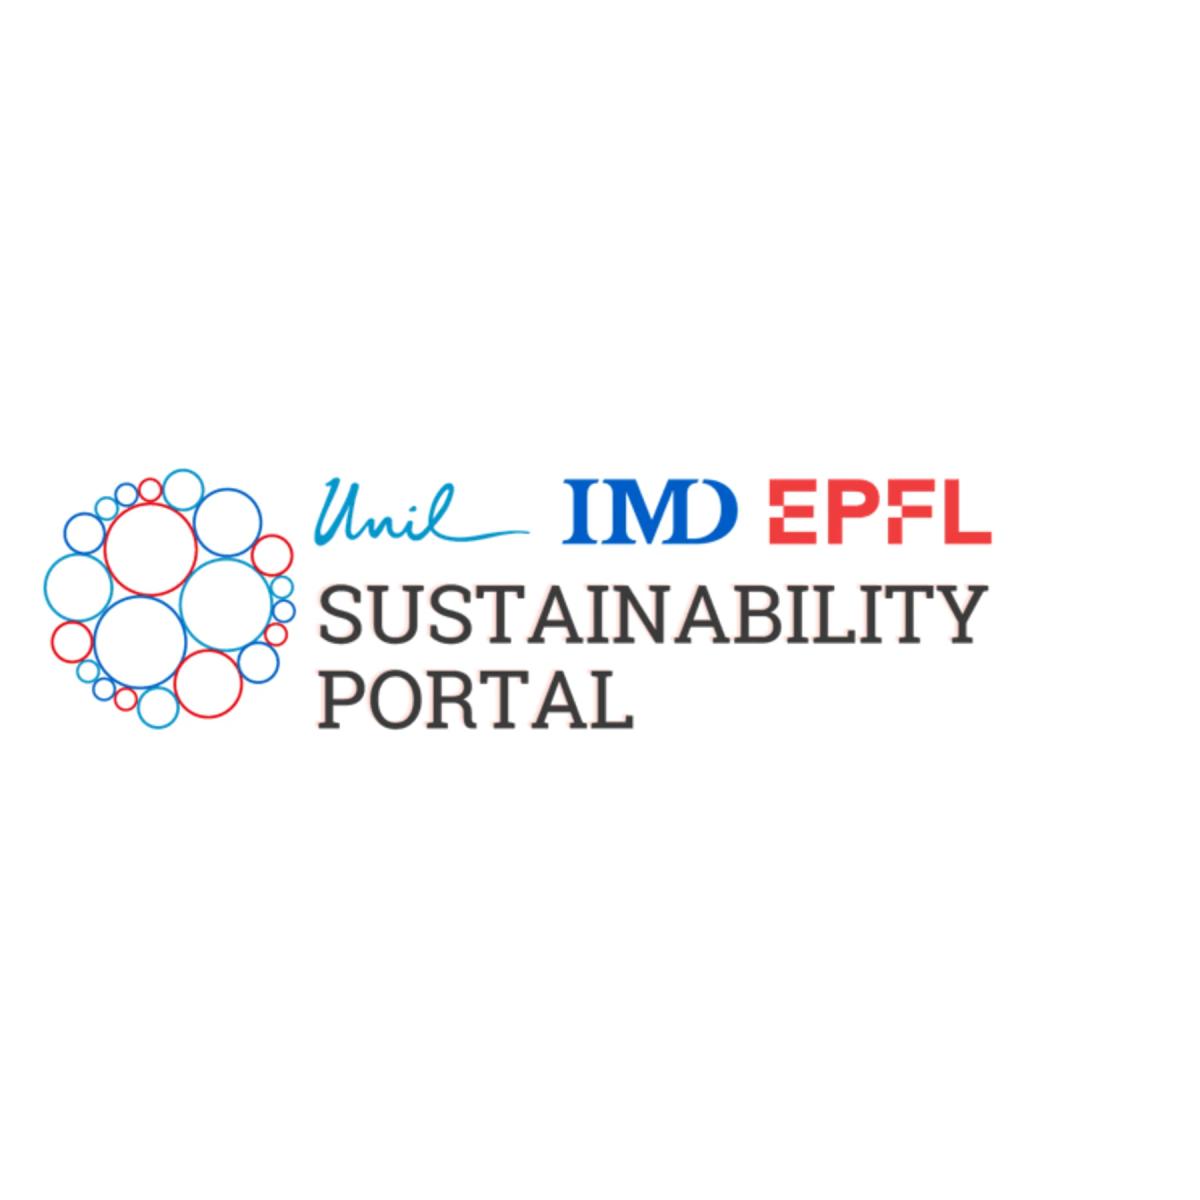 Sustainability Portal - UNIL, IMD and EPFL develop a platform bringing together sustainability stakeholders